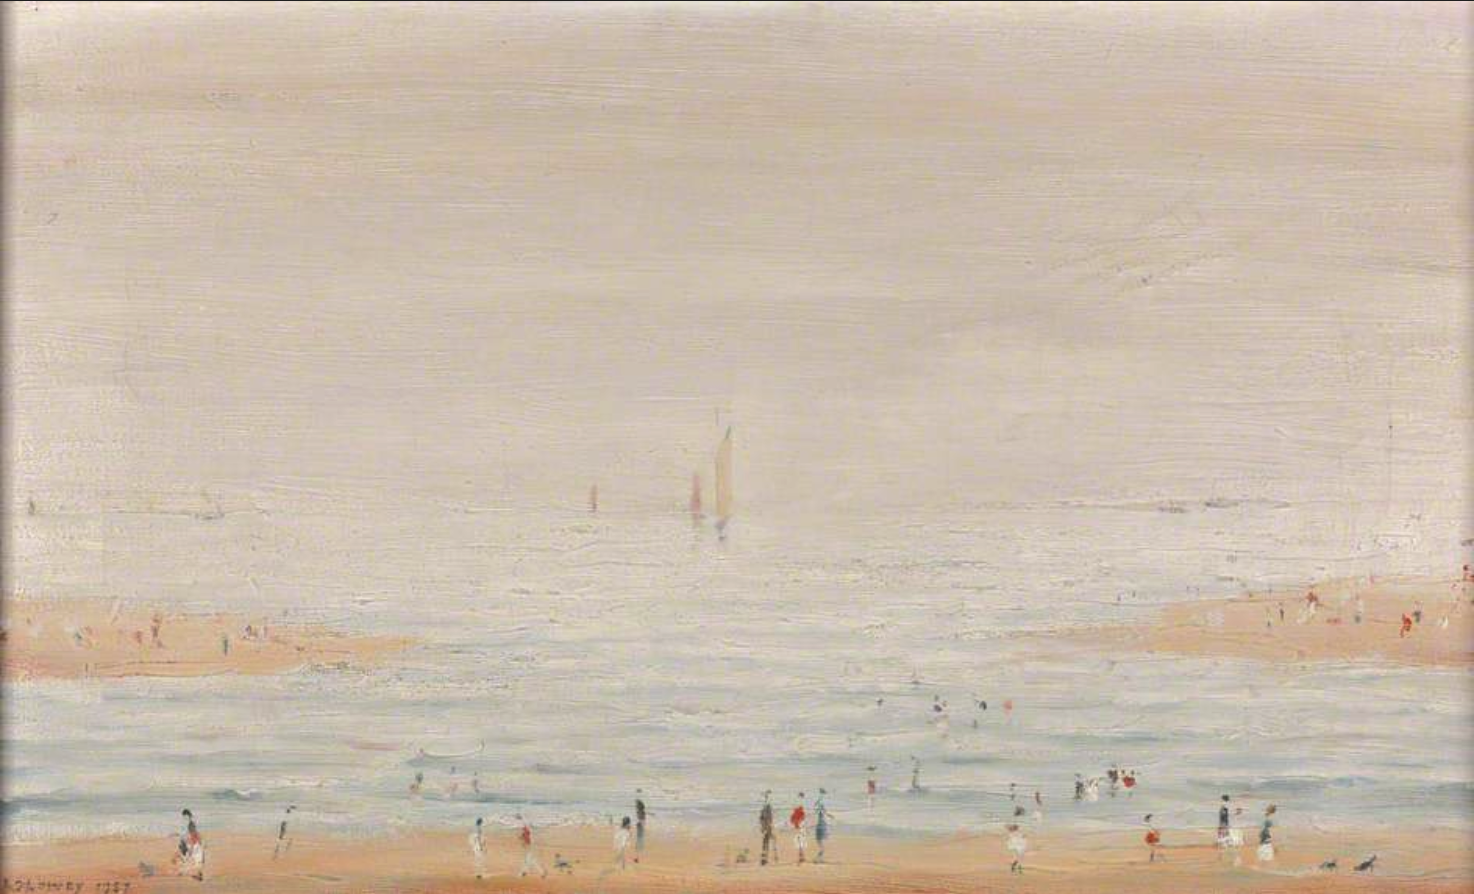 St Annes-on-Sea (1957) by Laurence Stephen Lowry (1887 - 1976), English artist.